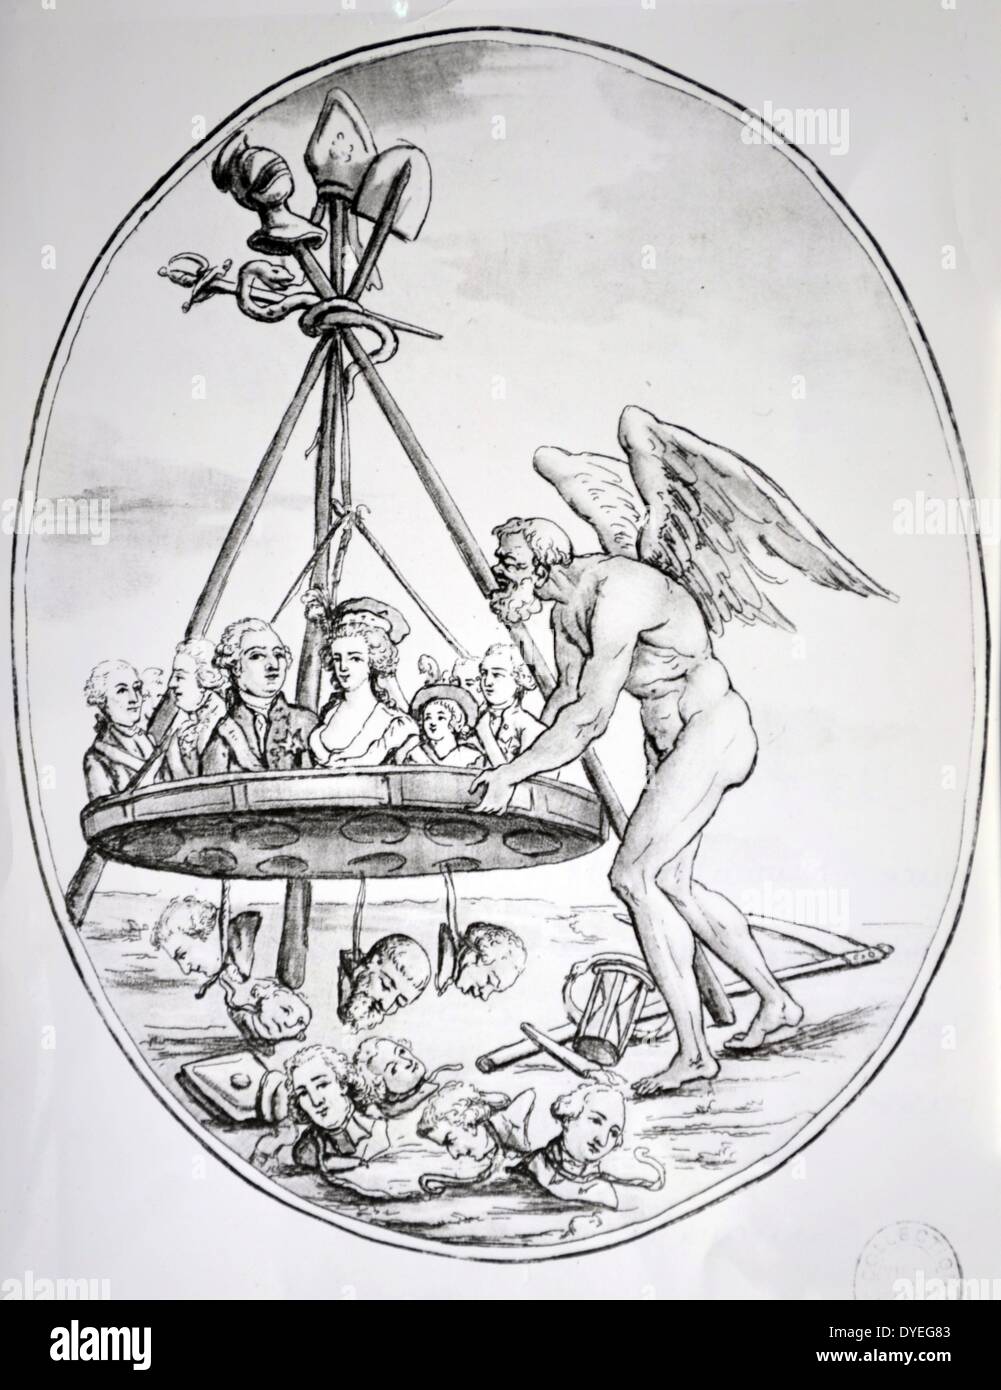 Le Crible de la Révolution. The riddle of the revolution 1789 caricature depicting the role of Louis Philippe Joseph d'Orléans (13 April 1747 – 6 November 1793). Commonly known as Philippe, he was a member of a cadet branch of the House of Bourbon, the ruling dynasty of France. He actively supported the French Revolution and adopted the name Philippe Égalité, but was nonetheless guillotined during the Reign of Terror Stock Photo